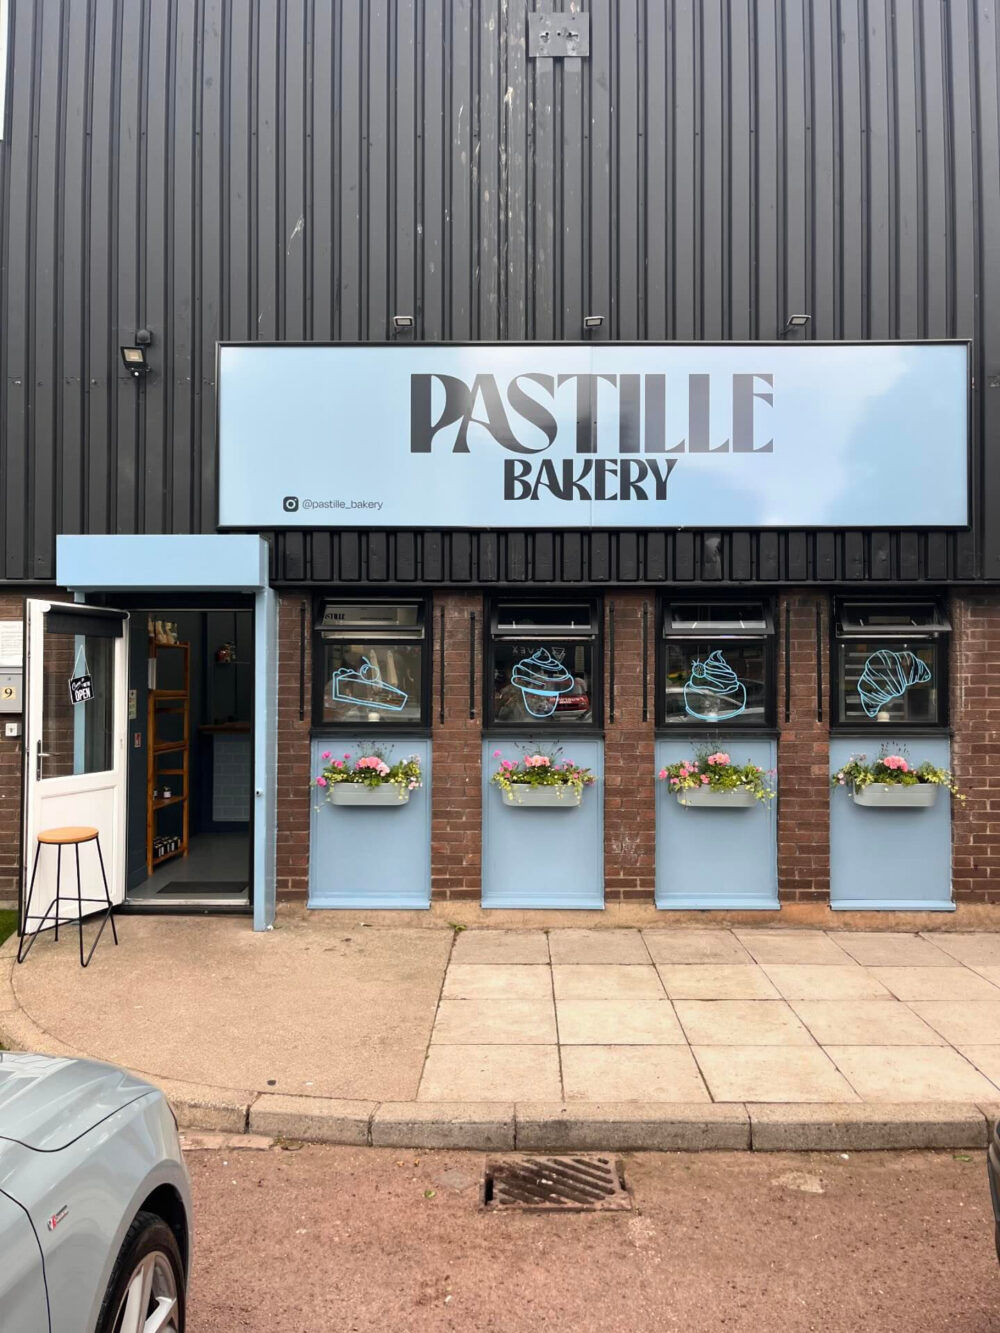 Meet the Scouser behind Liverpool’s newest bakery Pastille